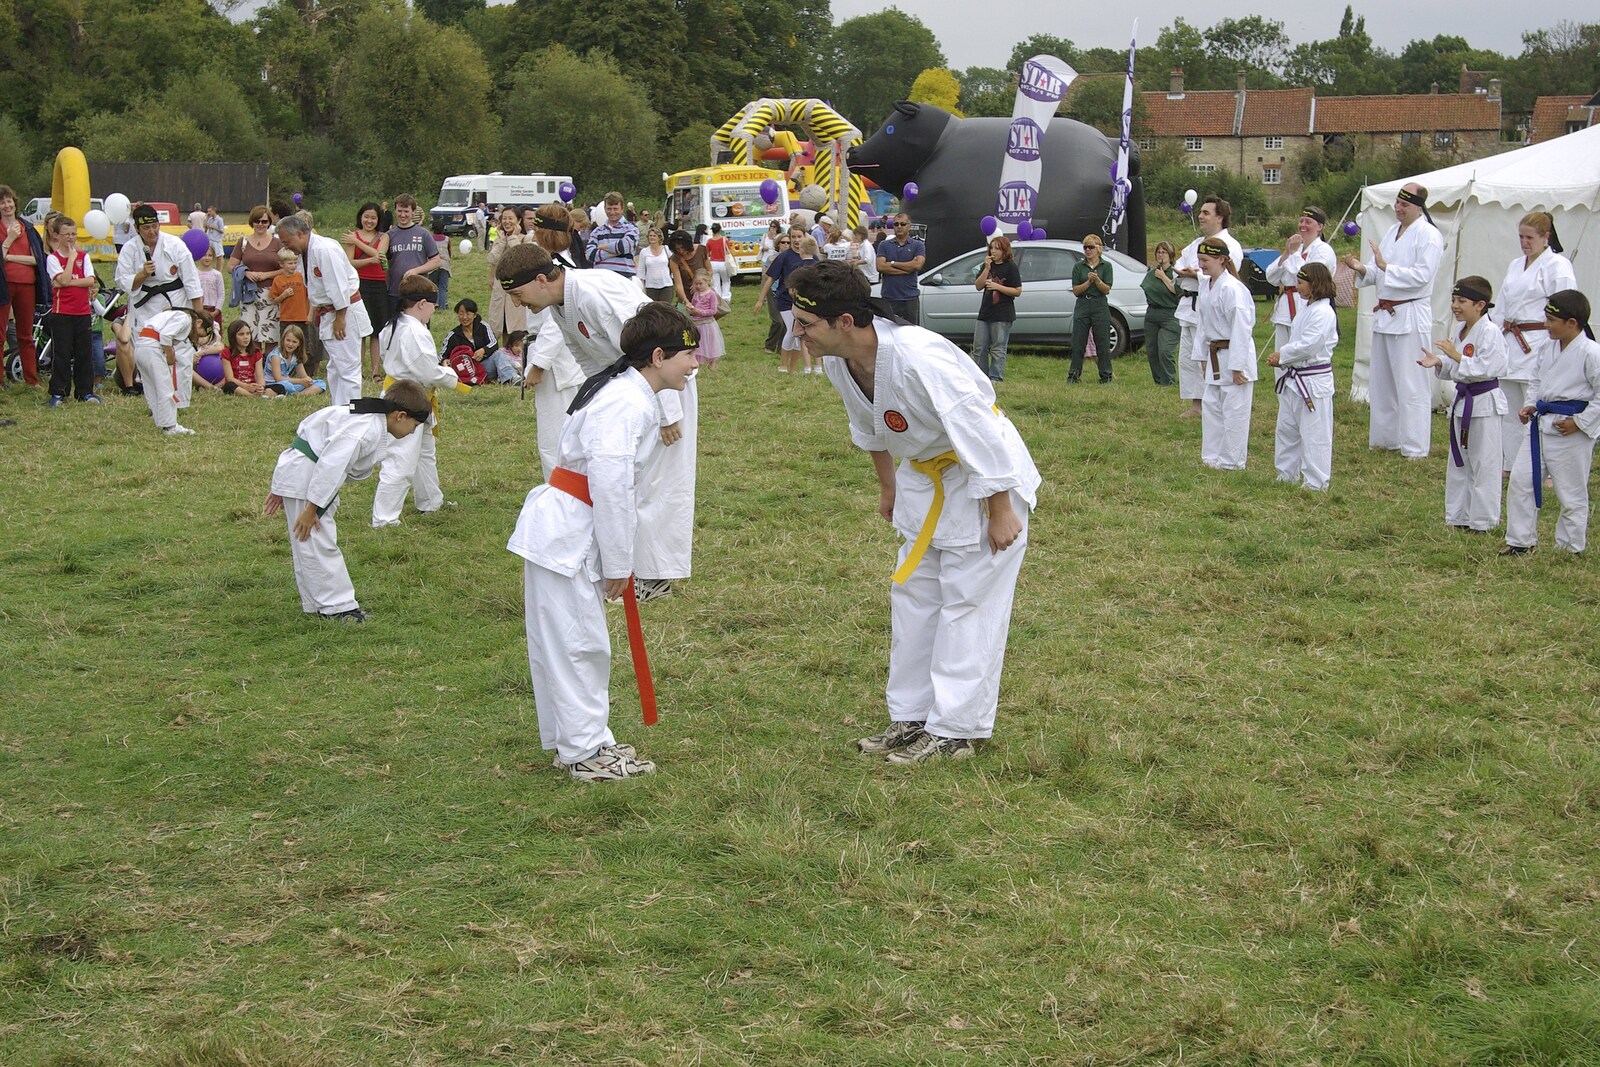 Qualcomm's Dragon-Boat Racing, Fen Ditton, Cambridge - 8th September 2007: Elsewhere, a Karate demonstration is taking place